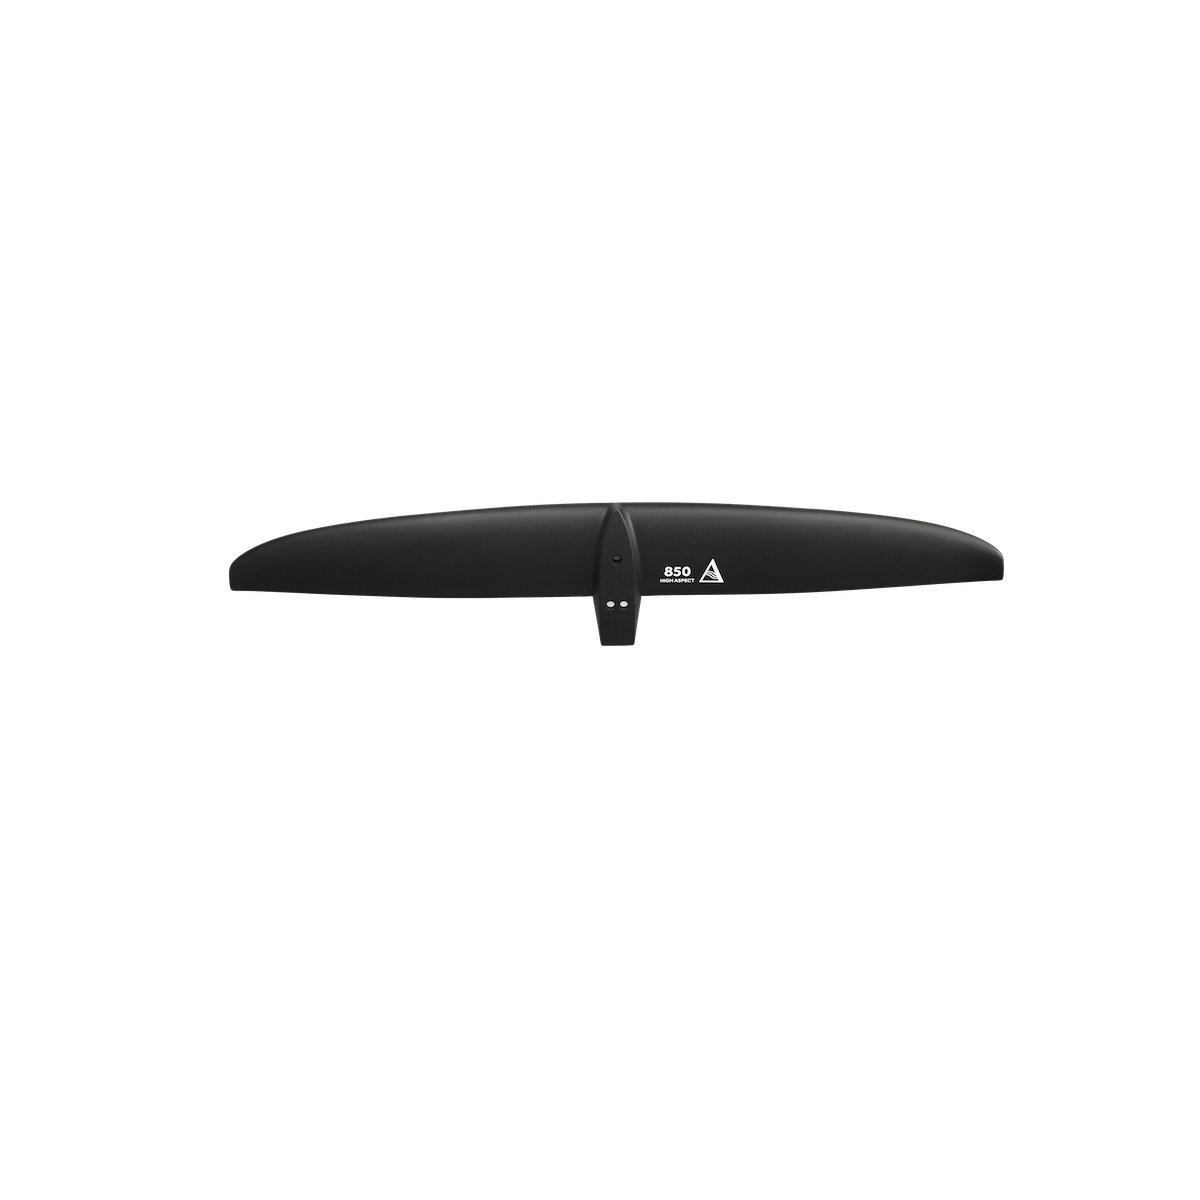 Delta Hydrofoil High Aspect 850 Front Wing